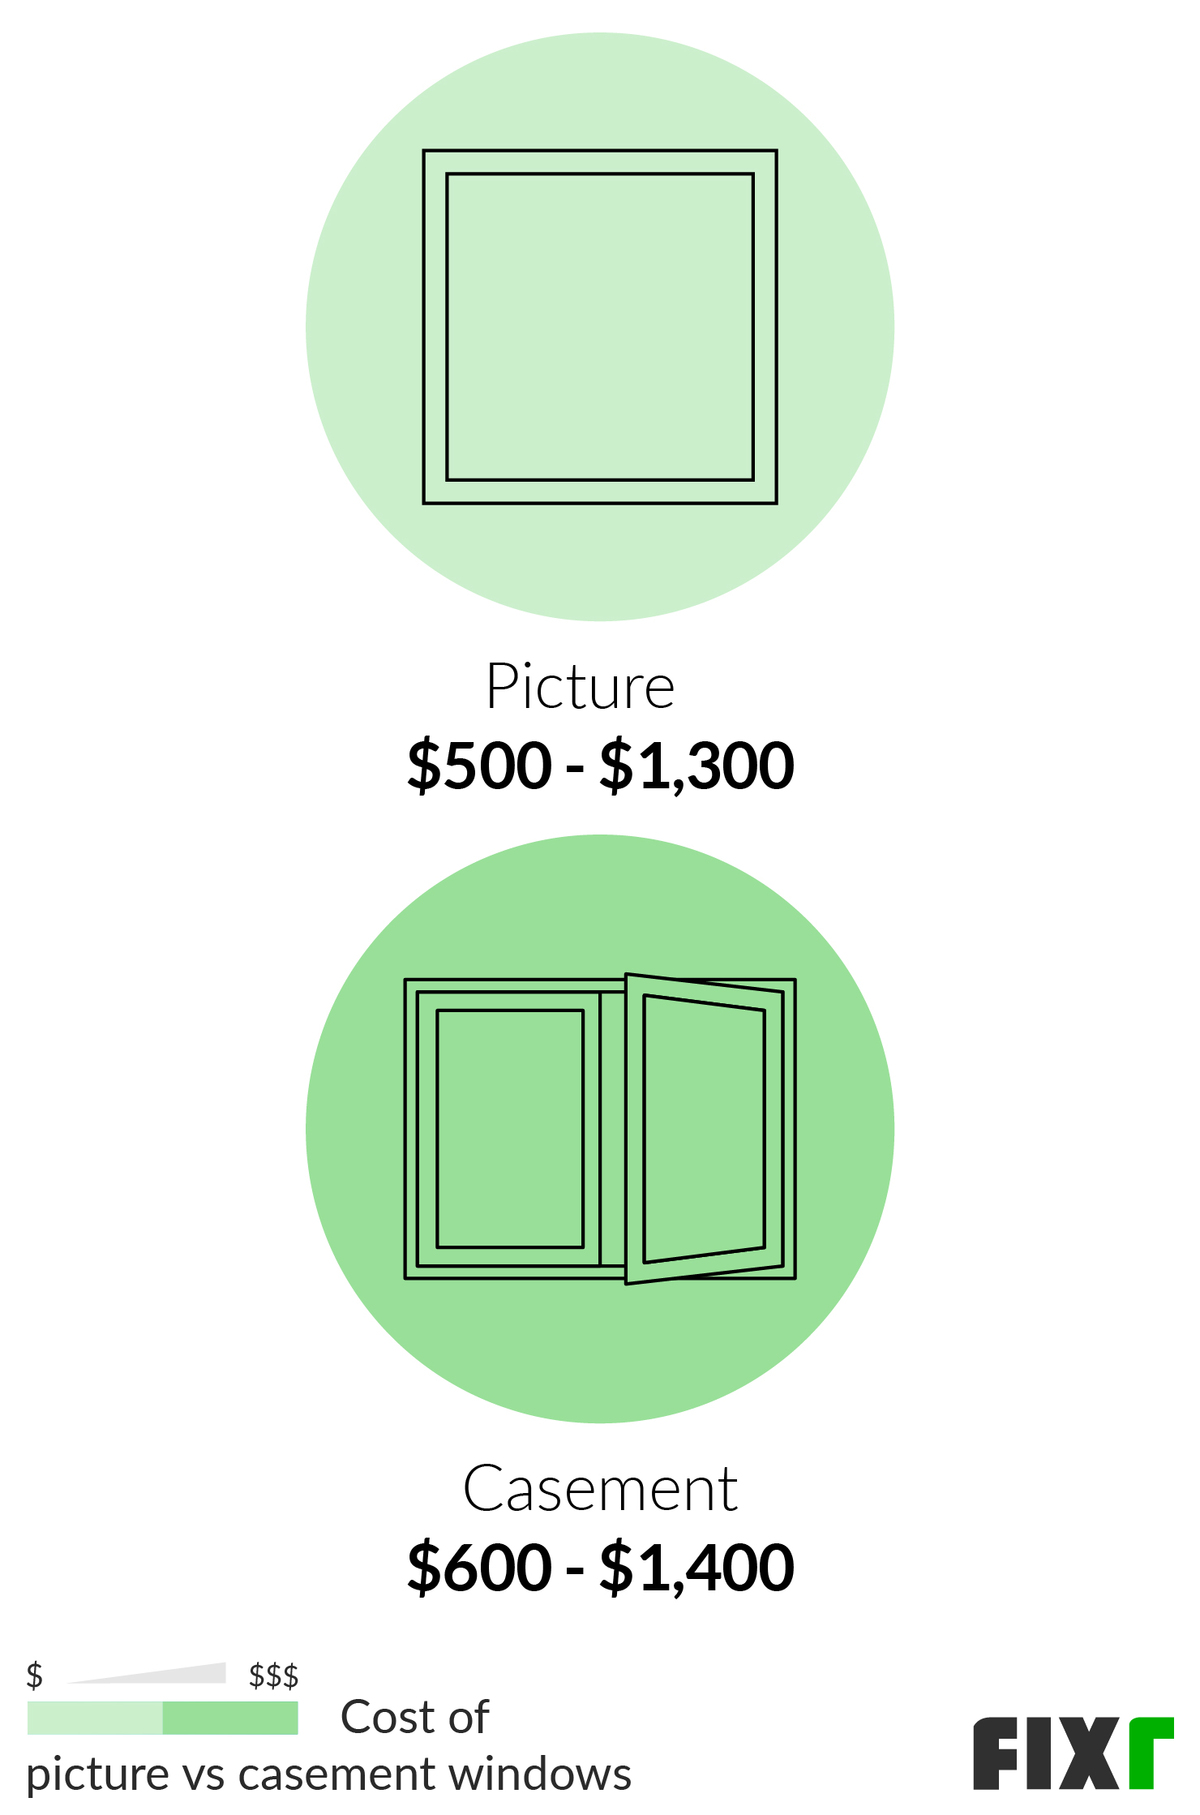 Comparison of the Cost to Install a Picture and a Casement Window